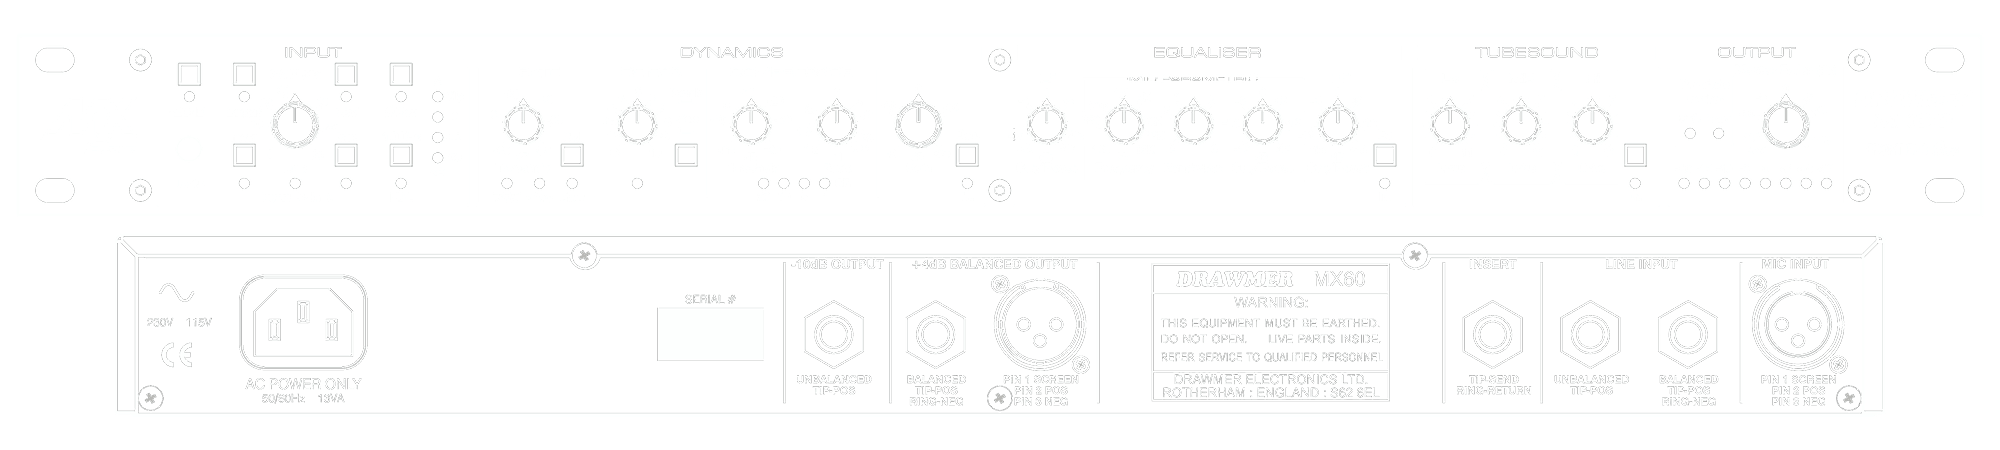 A line drawing of the front and rear panels of the MX60pro showing controls and connectors